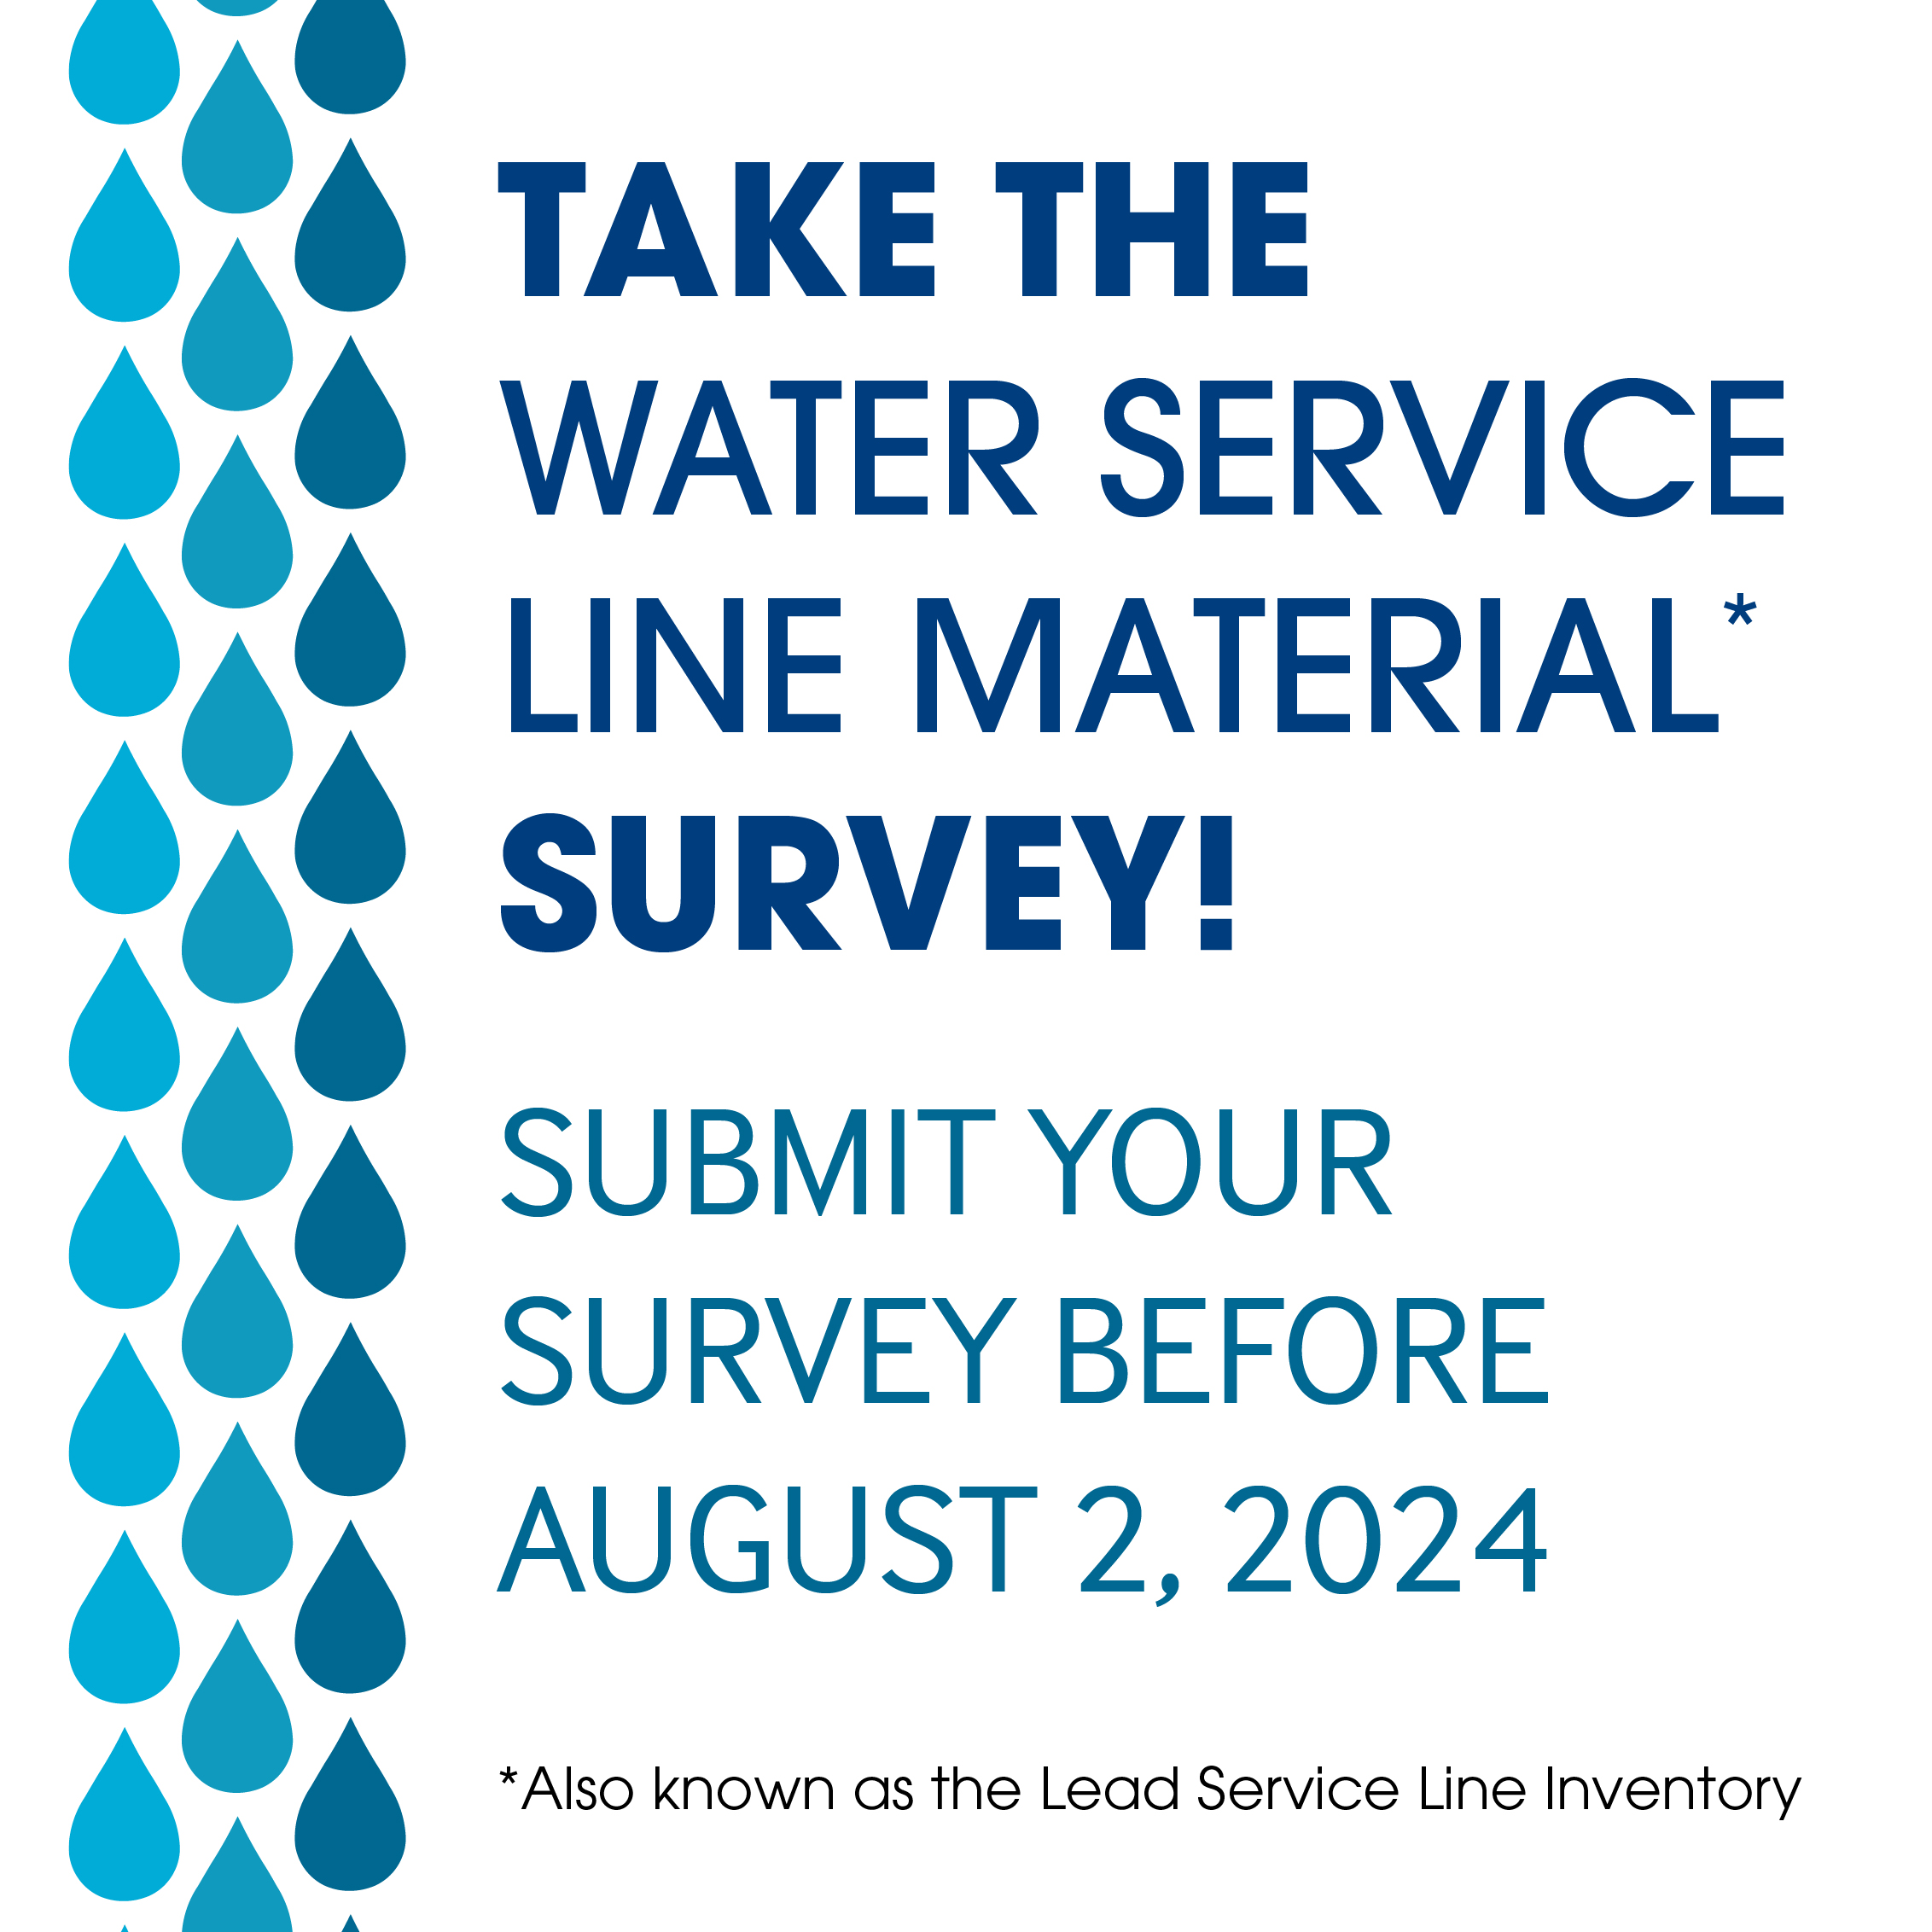 Text: Take the Water Service Line Material* survey! Submit your survey before August 2, 2024. *Also known as the Lead Service Line Inventory.